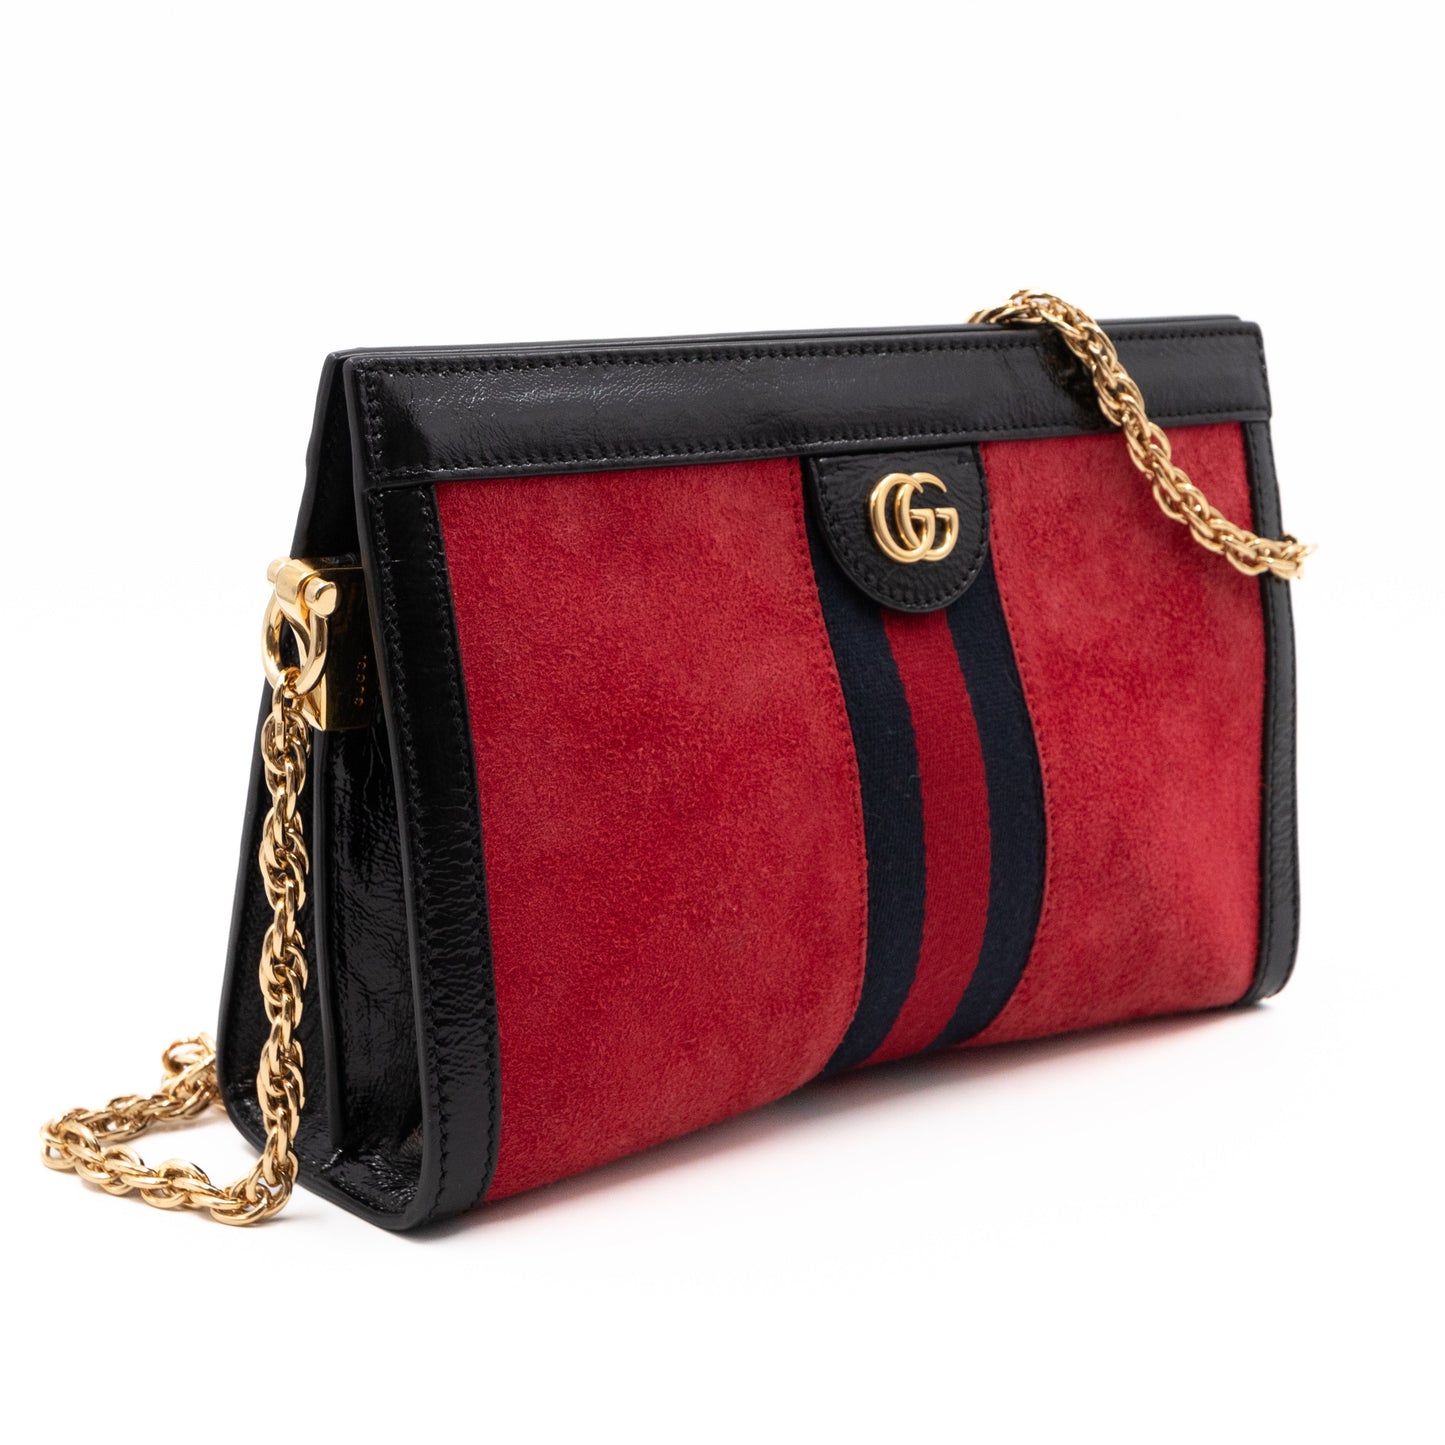 Ophidia GG Small Shoulder Bag Red Suede